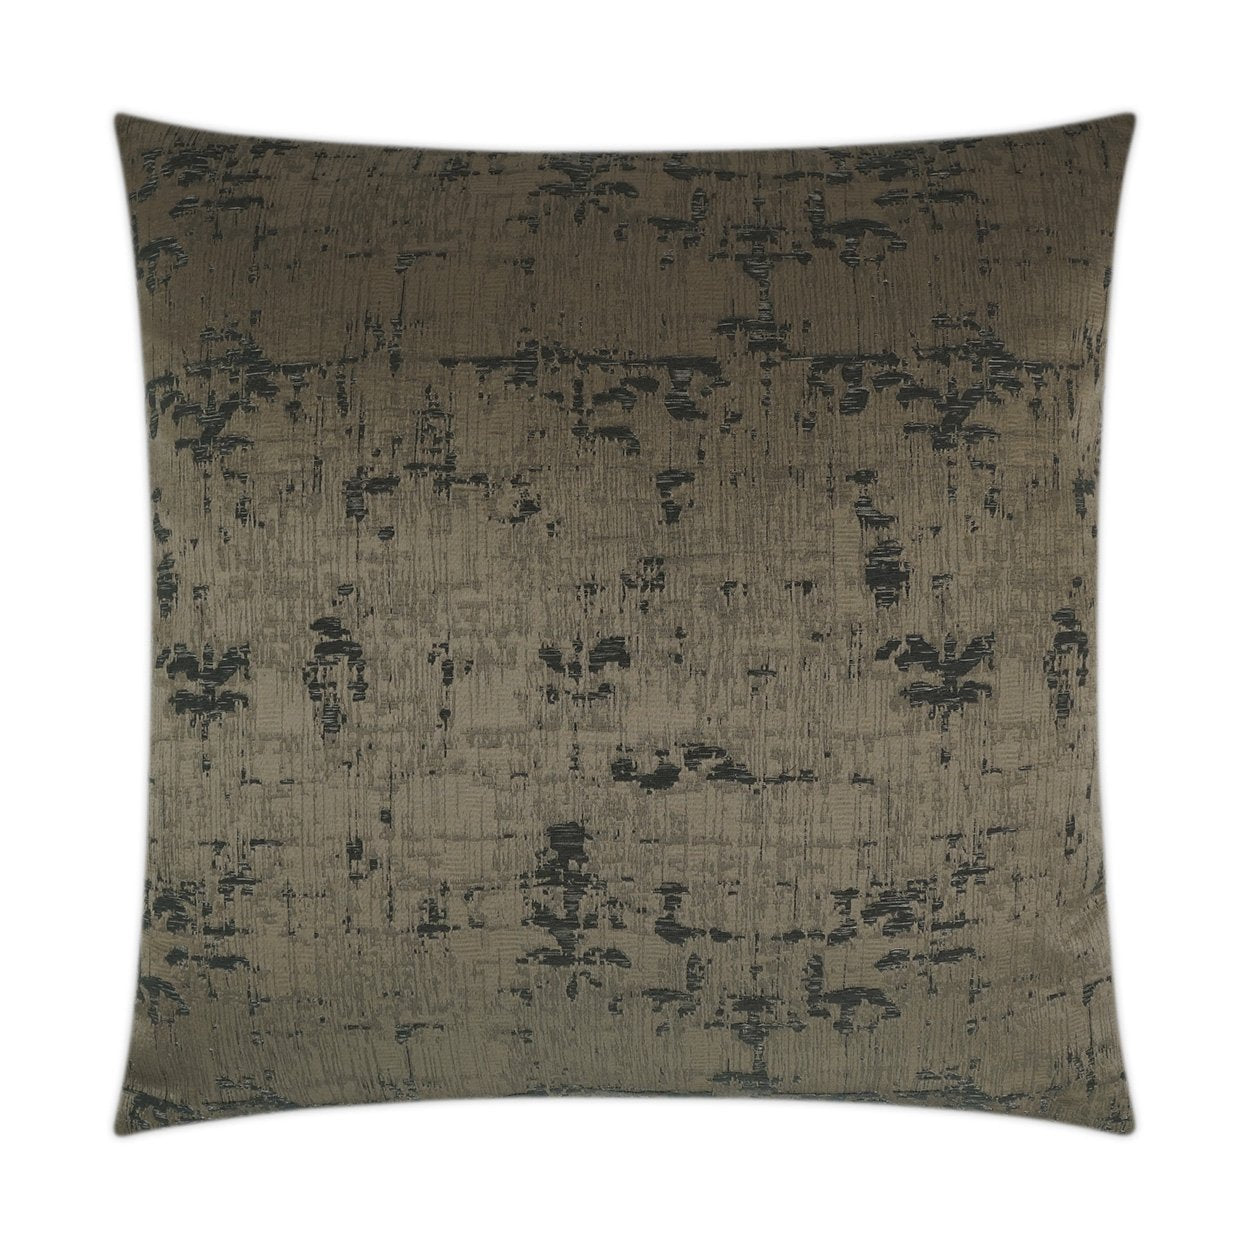 Luxury Pillow - 24” x 24” - Ava Truffle; Bronze texture over dark gray background in an abstract pattern